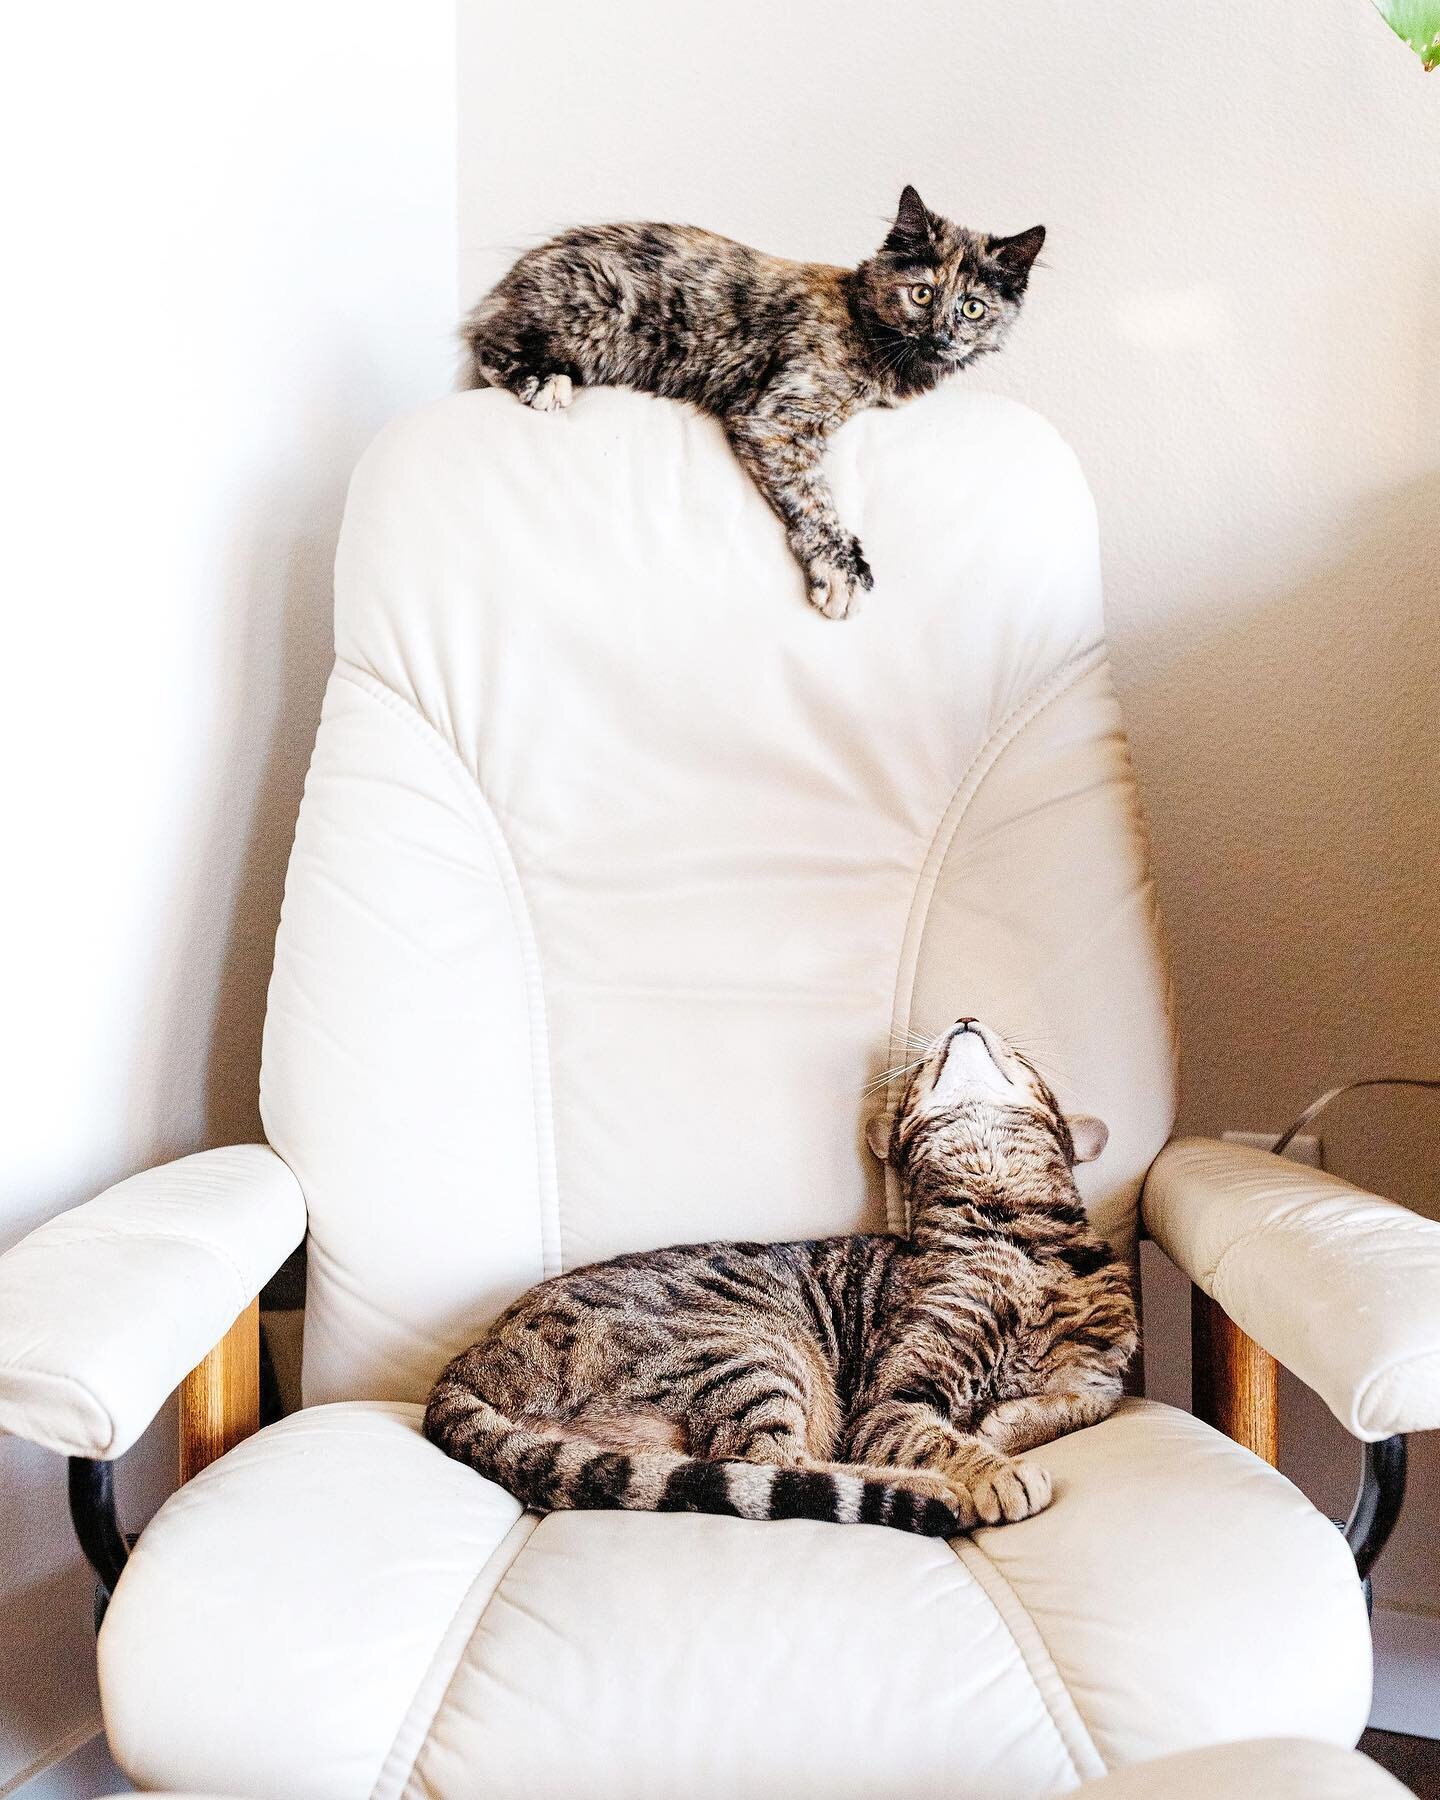 You ever see two cats that don't live with each other become friends? Ronan was just beginning to walk again when @modernestnw adopted Serafina, so they would bring her over for a little buddy-buddy physical therapy. Maybe it was just the kitty proza